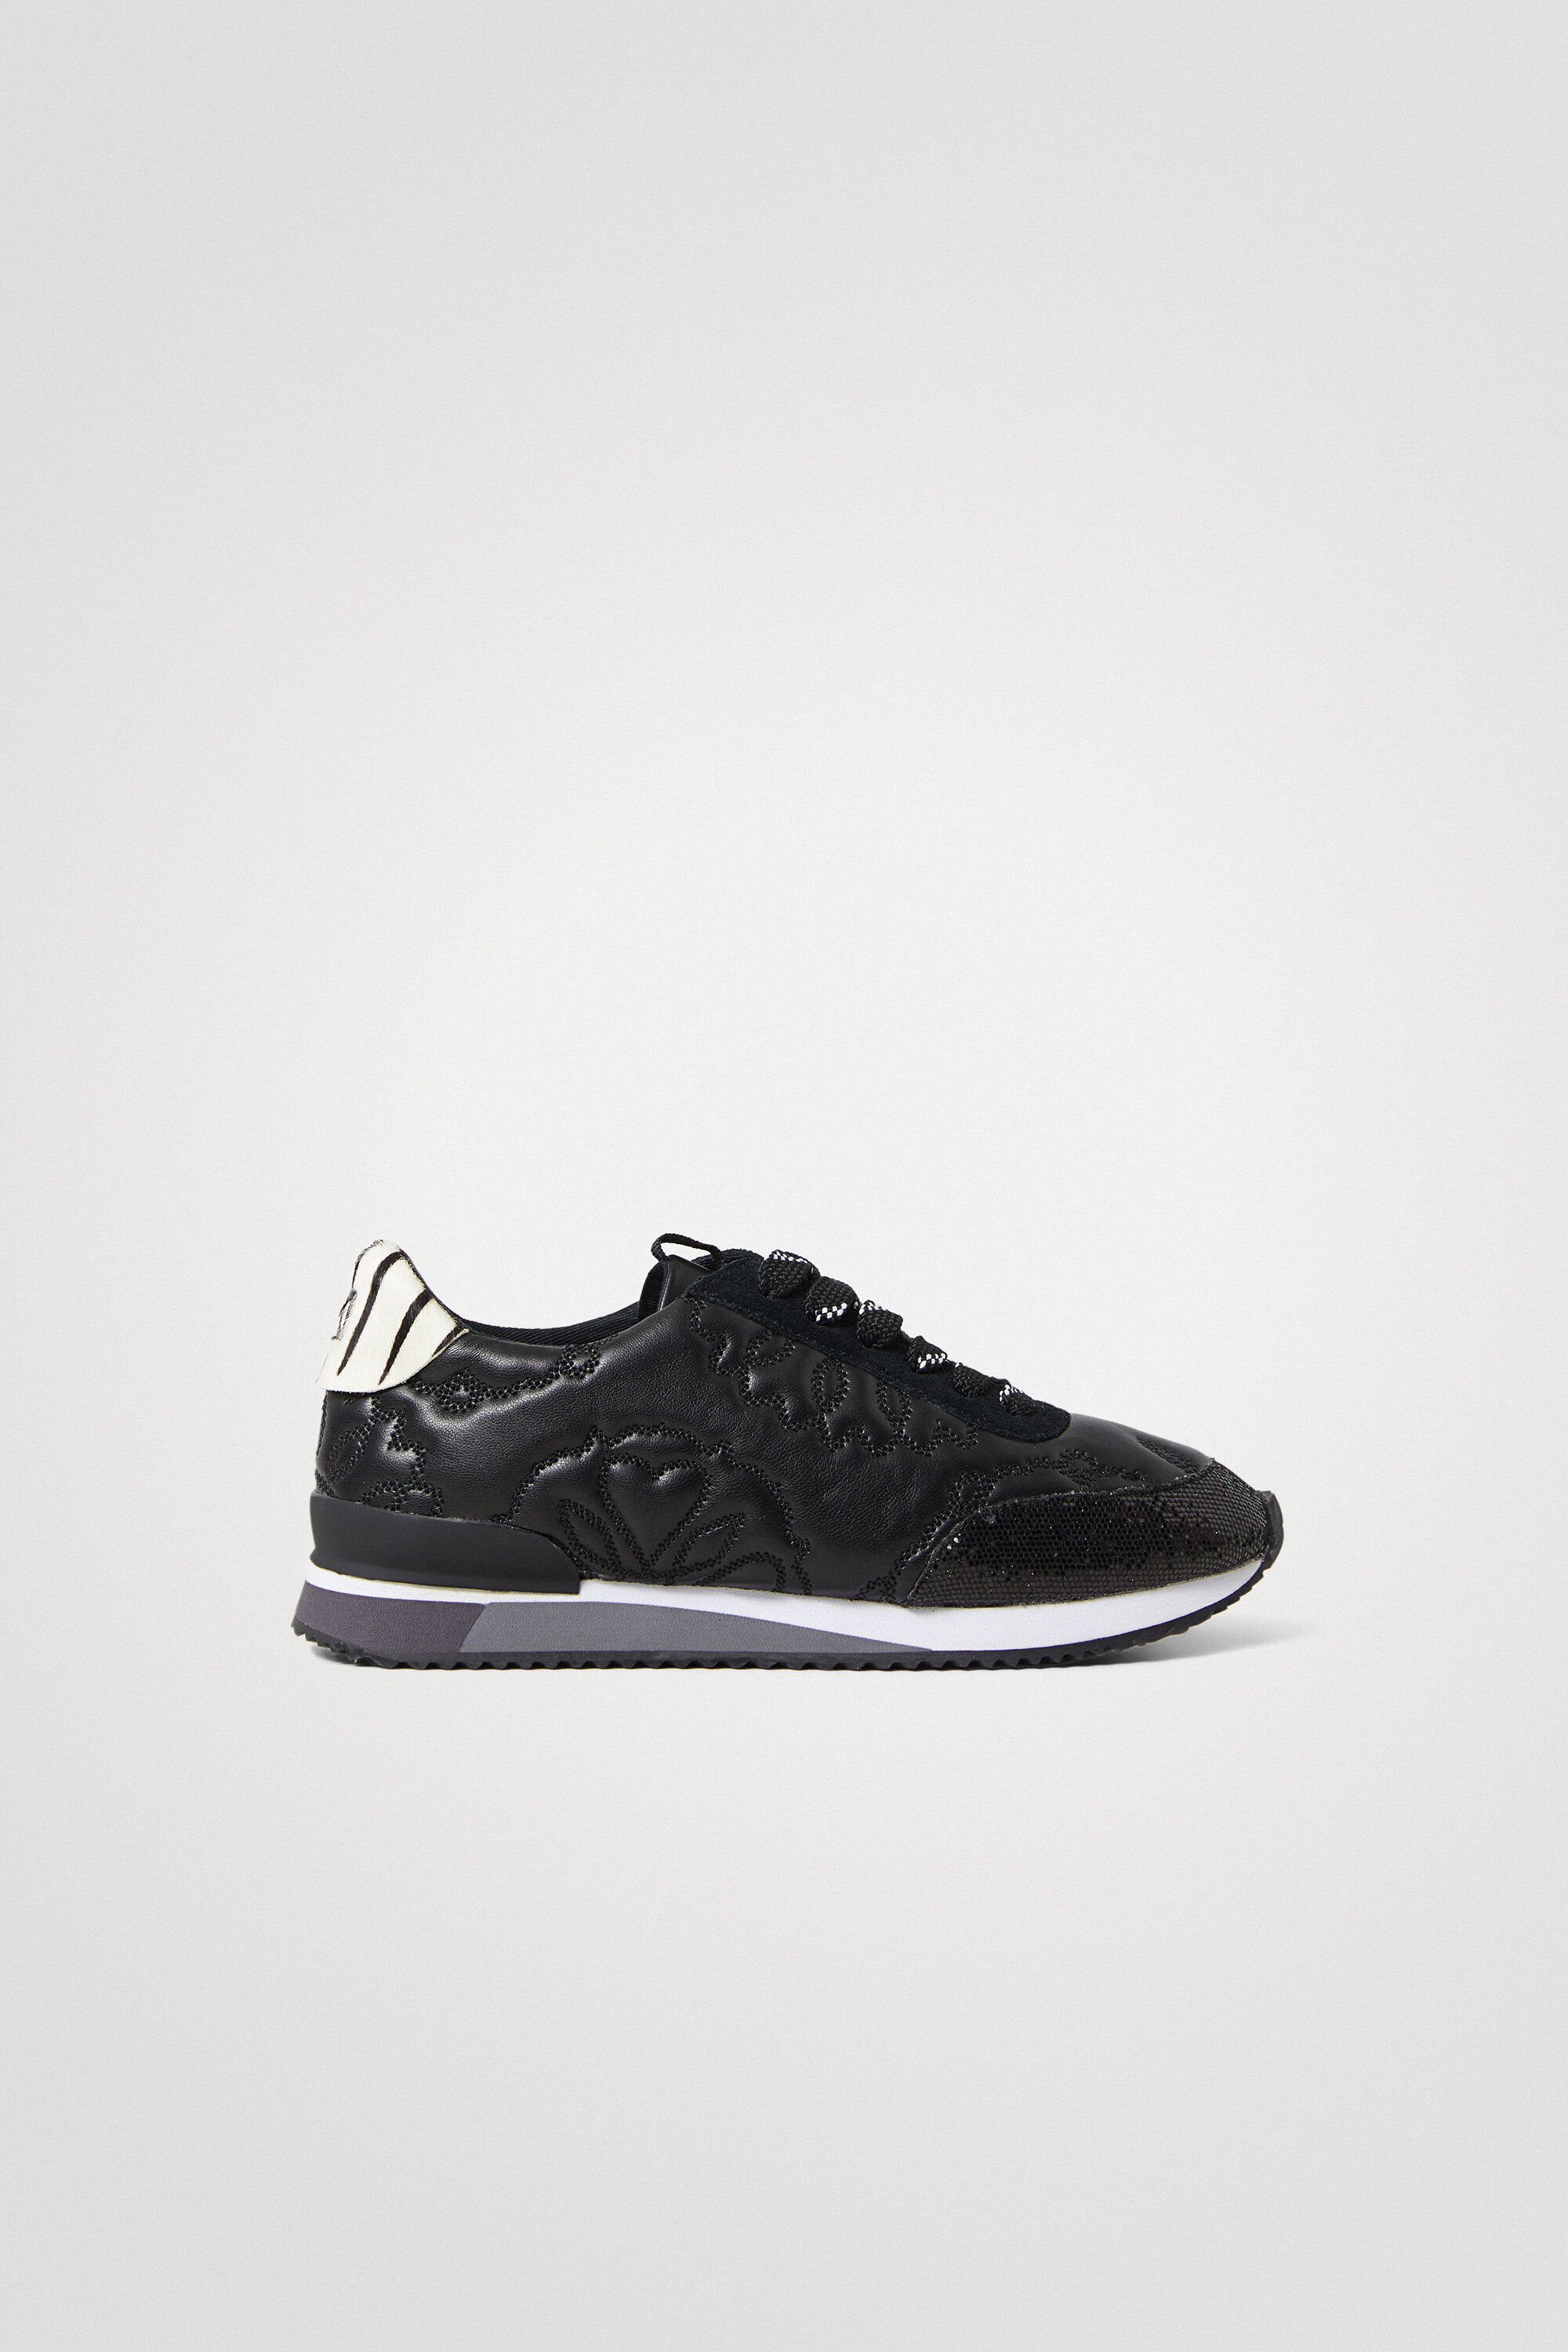 Desigual Synthetic Leather Running Sneakers Embossed In Black